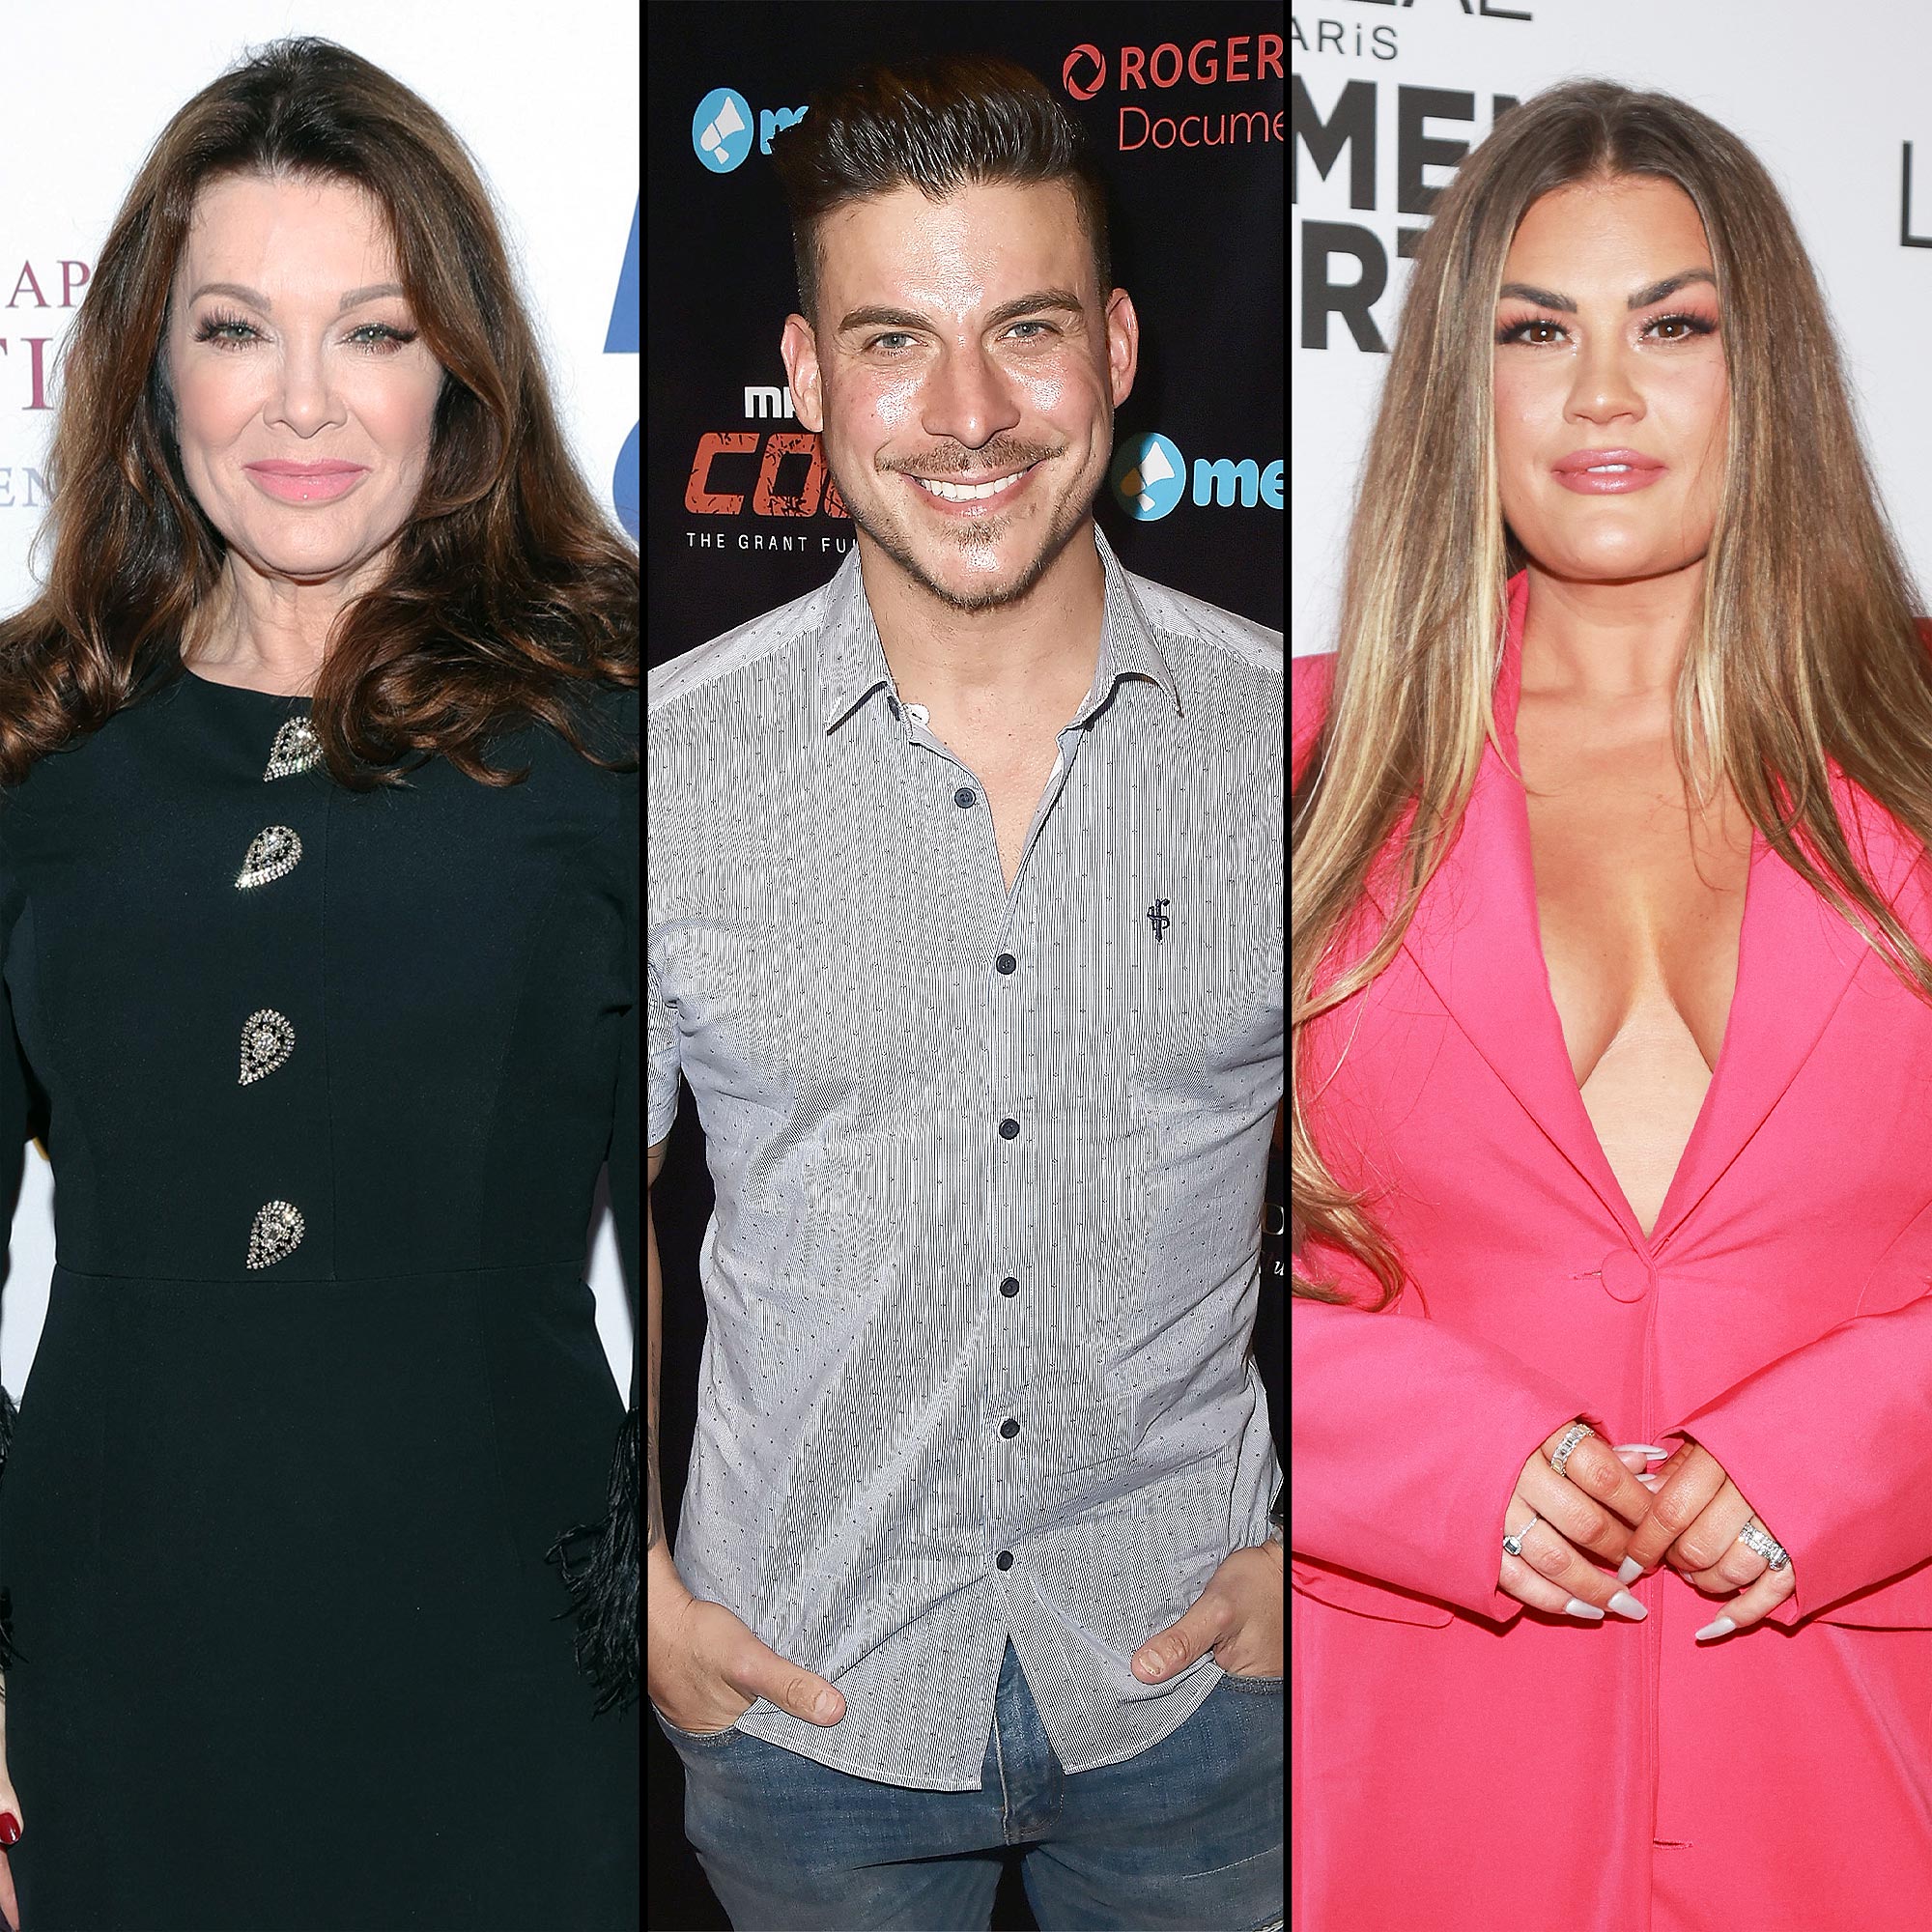 LVP Gets Brutally Honest About Jax Taylor and Brittany Cartwright's Split